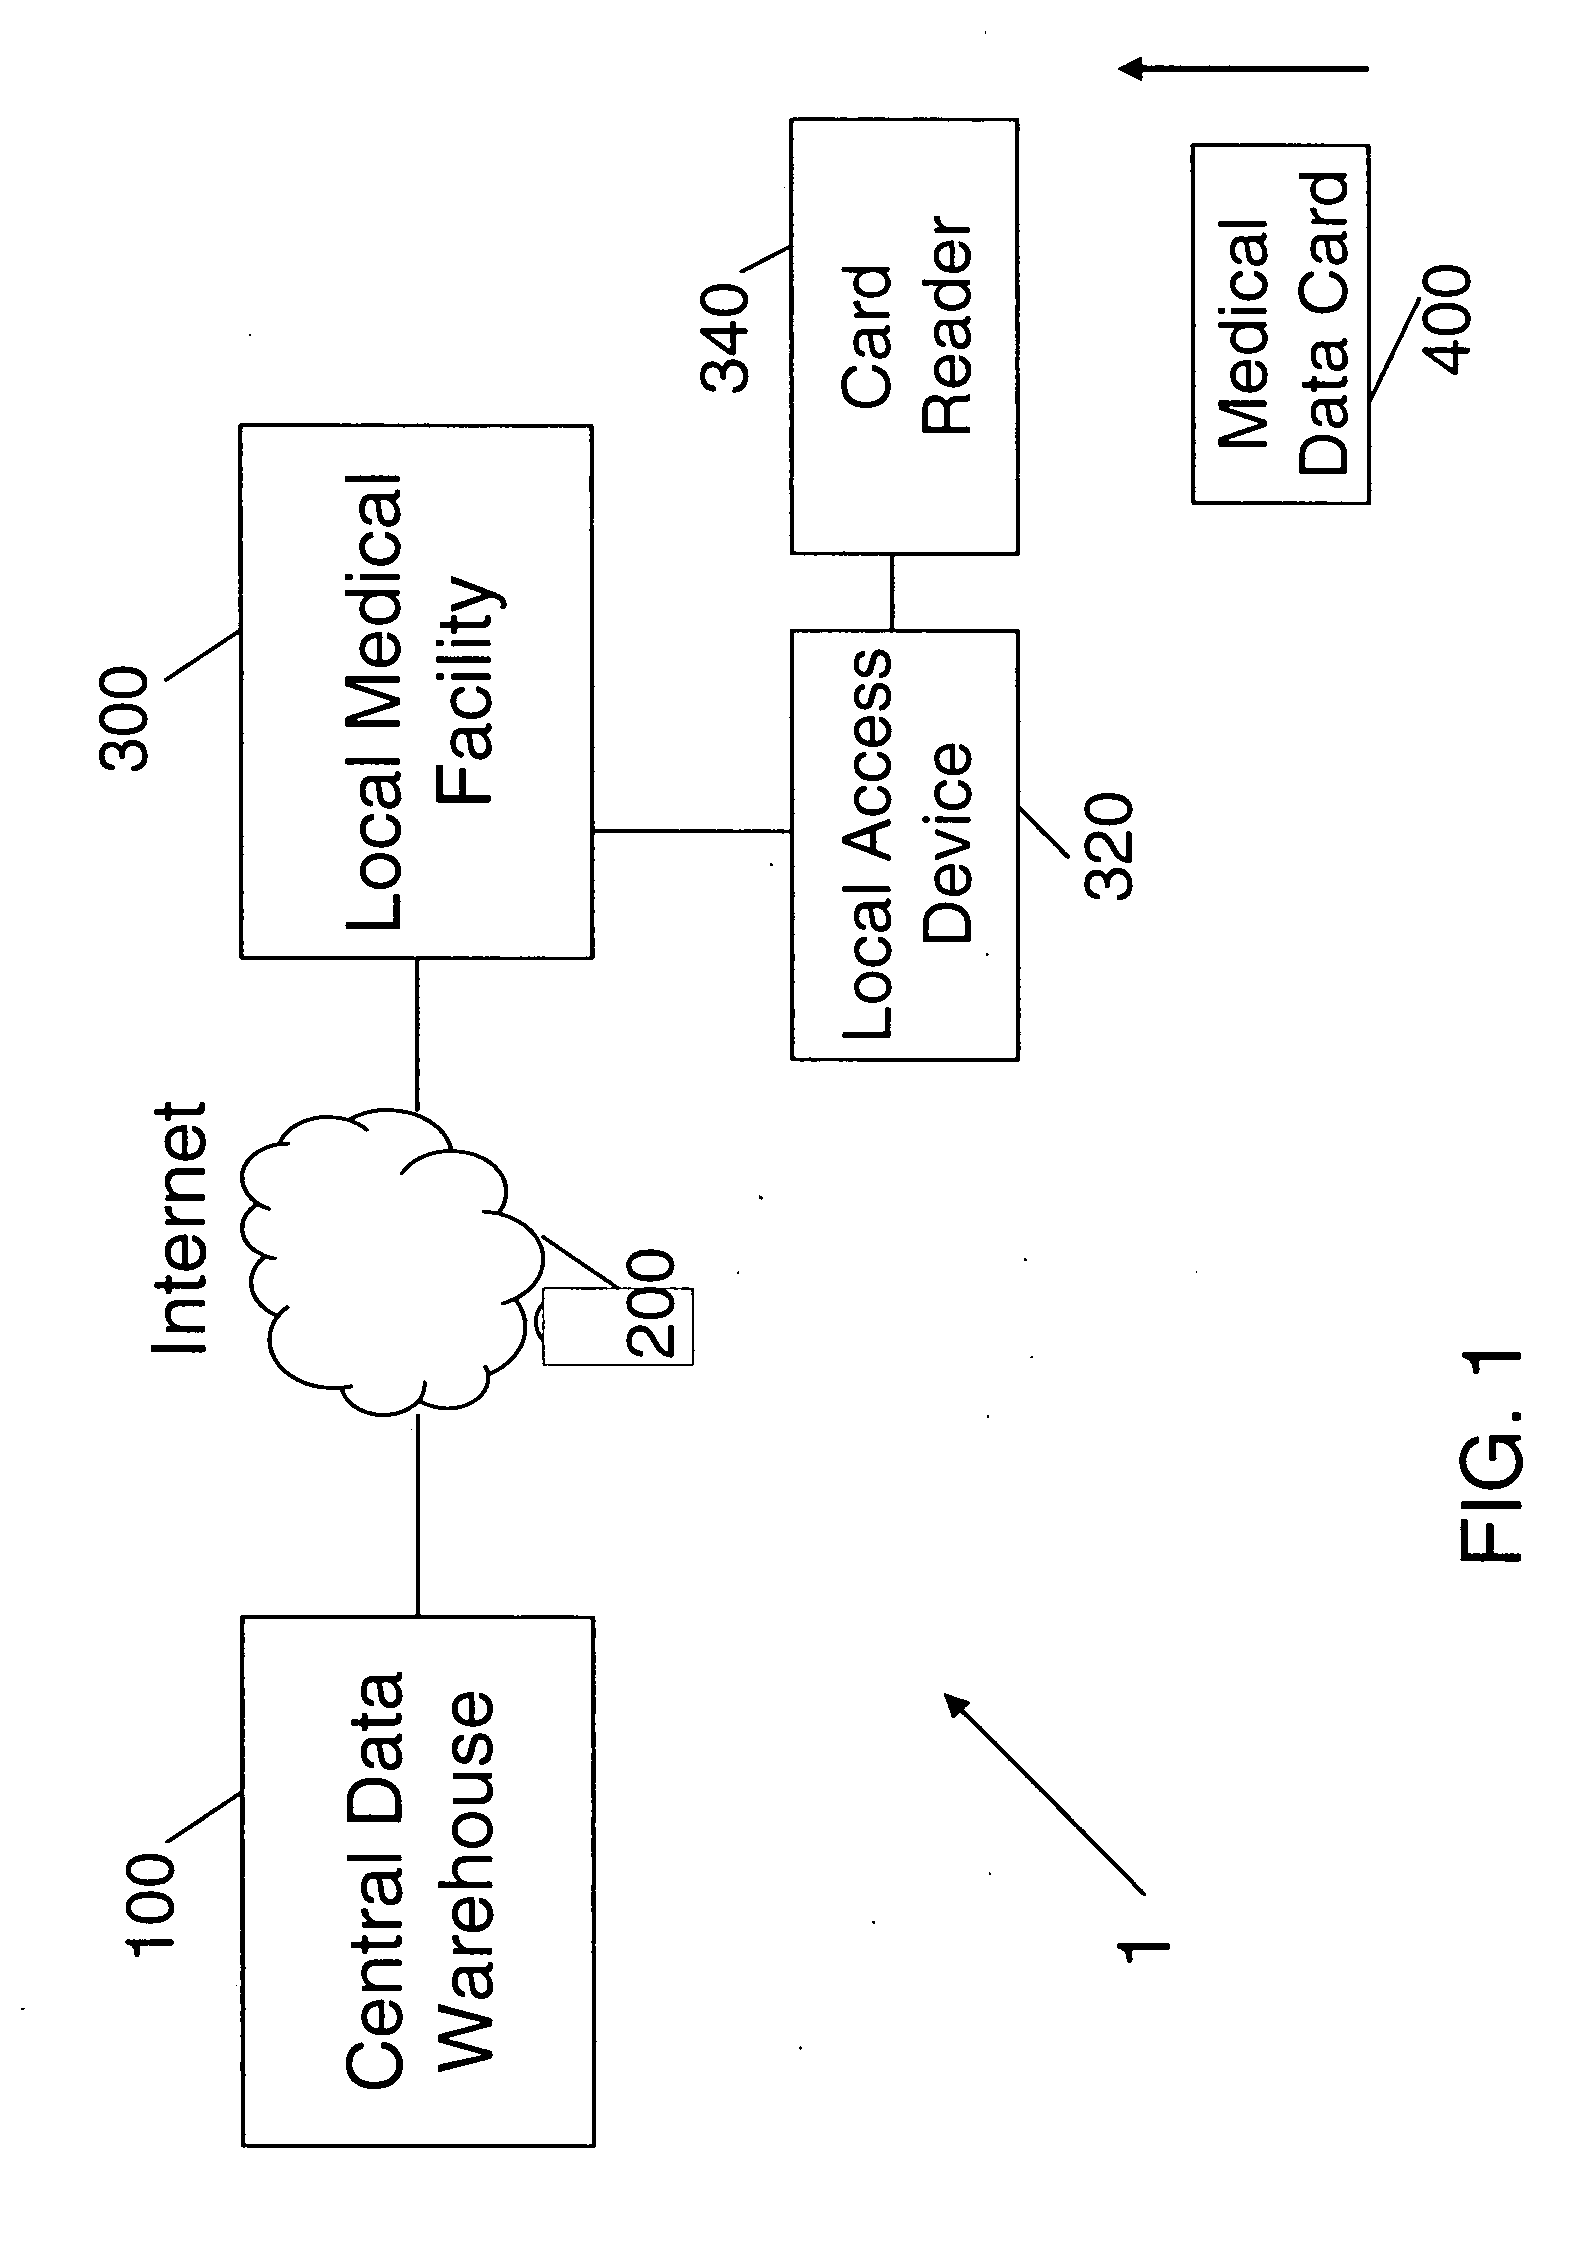 Method for managing the release of data